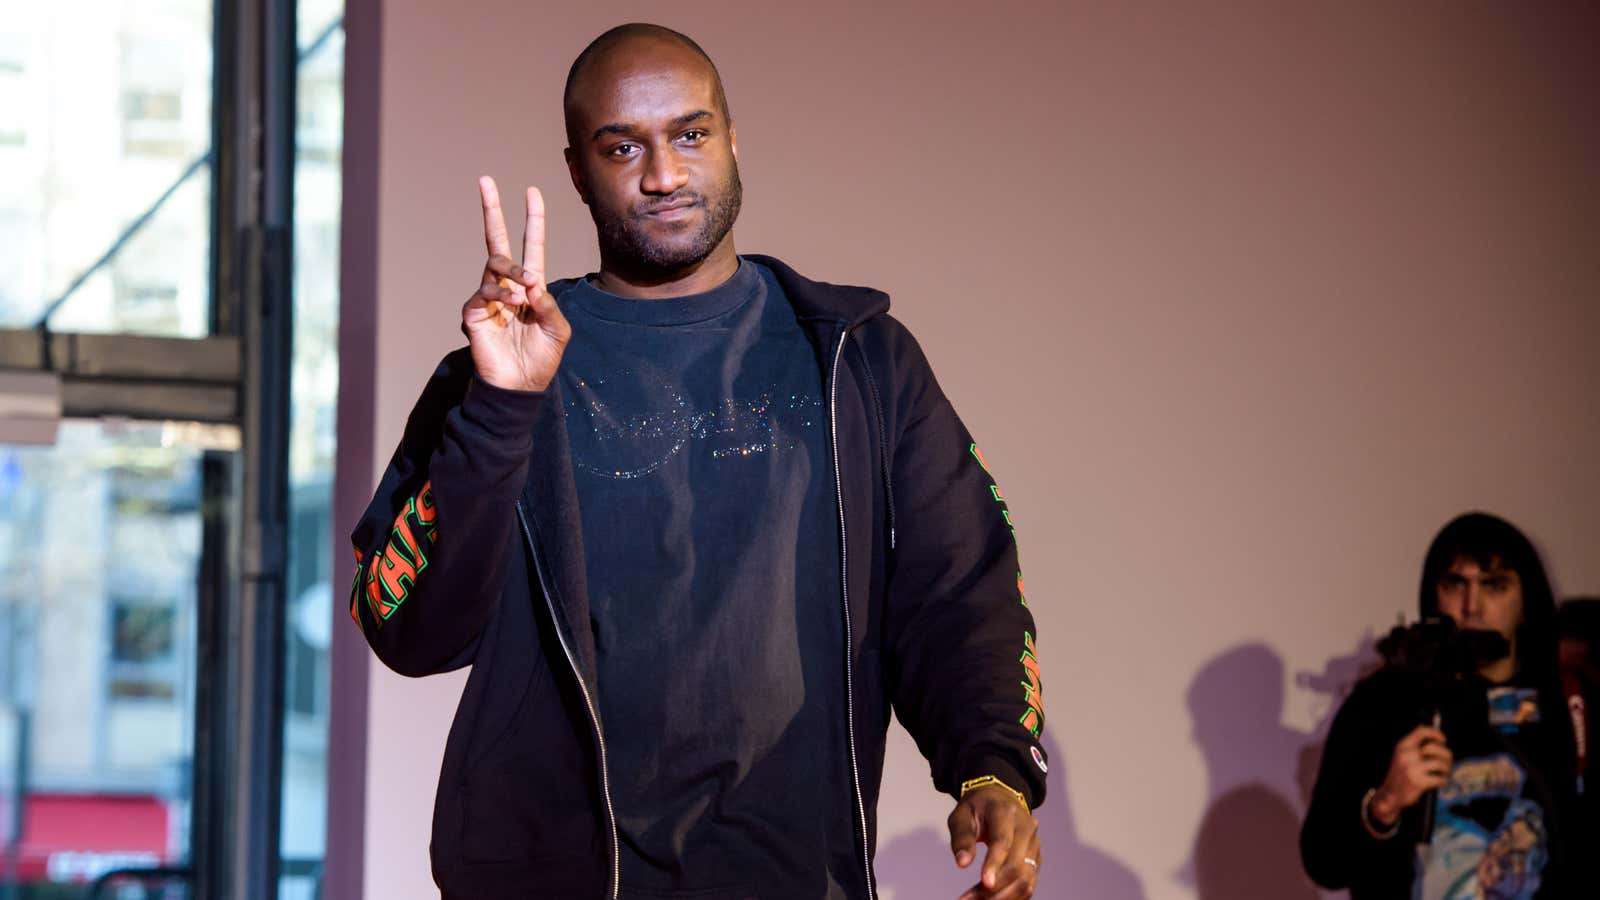 Louis Vuitton's new men's designer Virgil Abloh is known for streetwear,  not high fashion